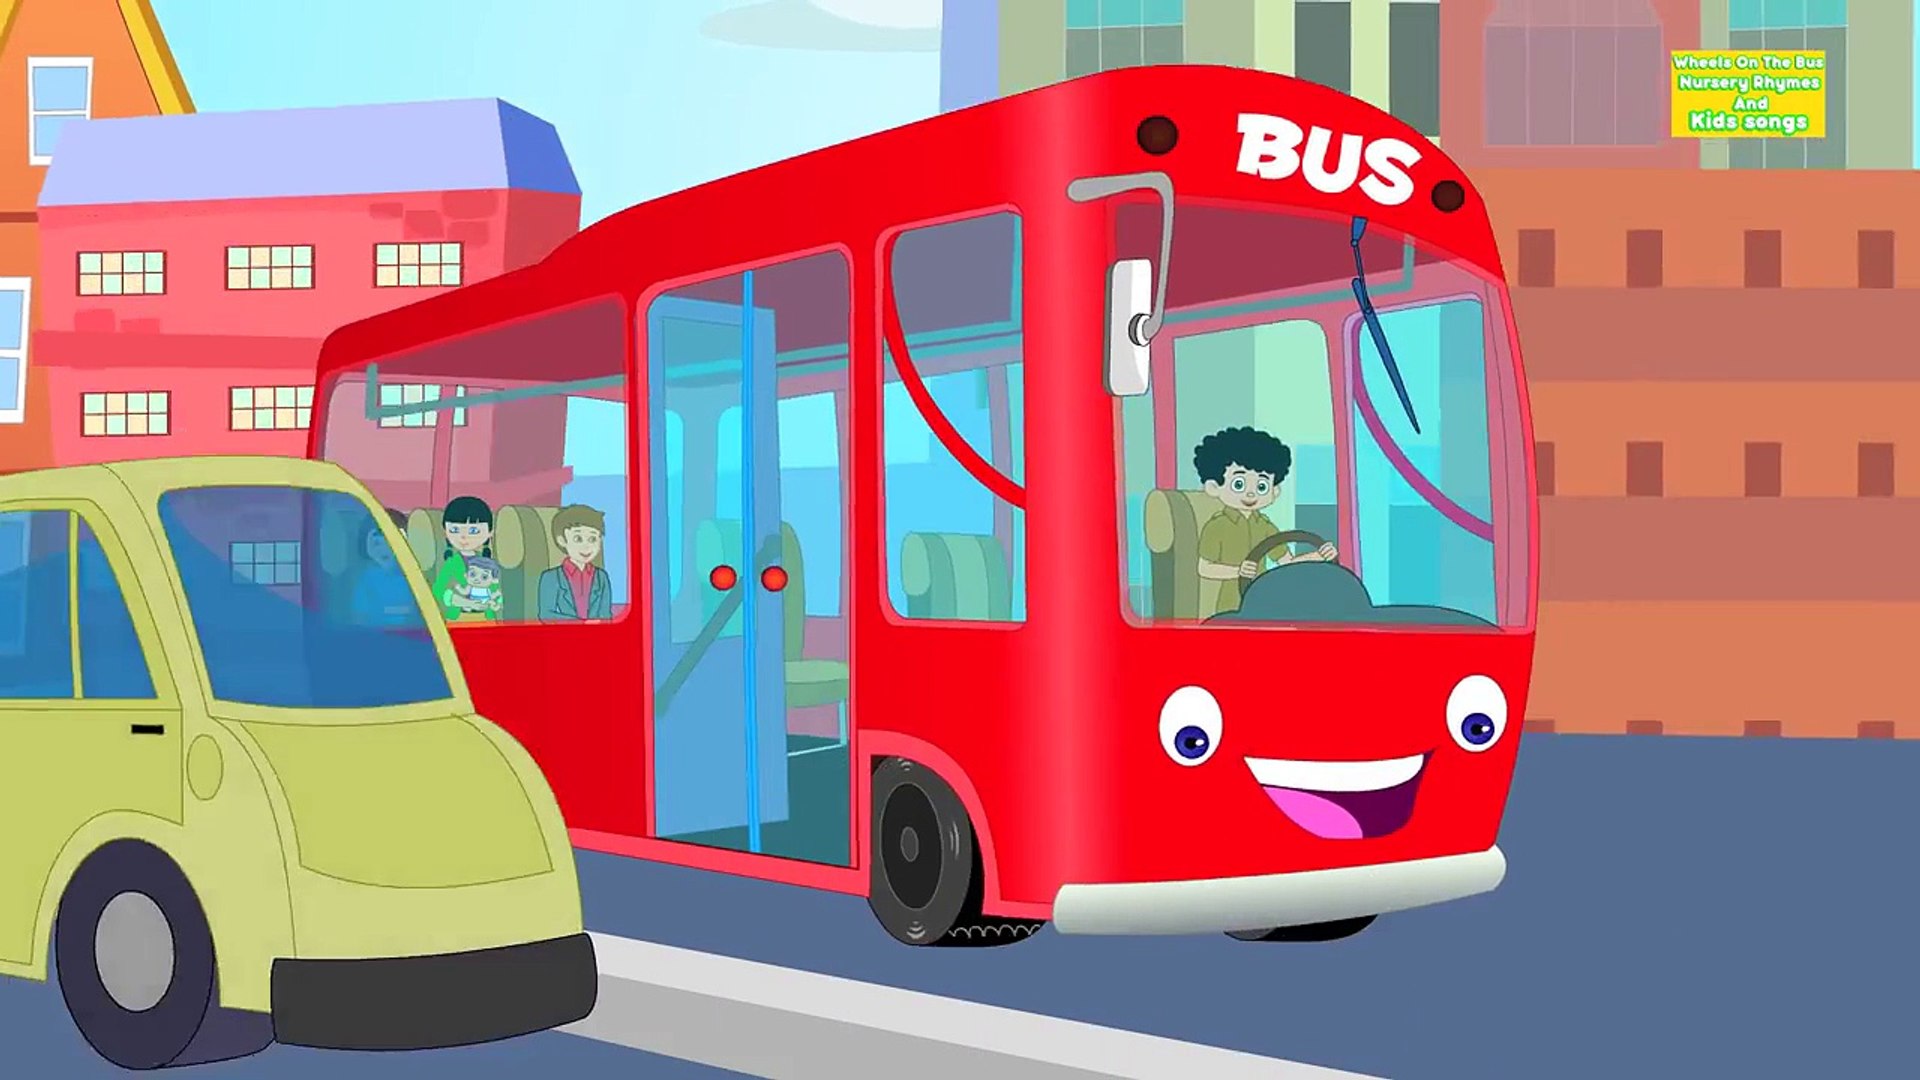 Wheels on the bus goes round and round   Kids Songs And Nursery rhymes with  lyrics for chi